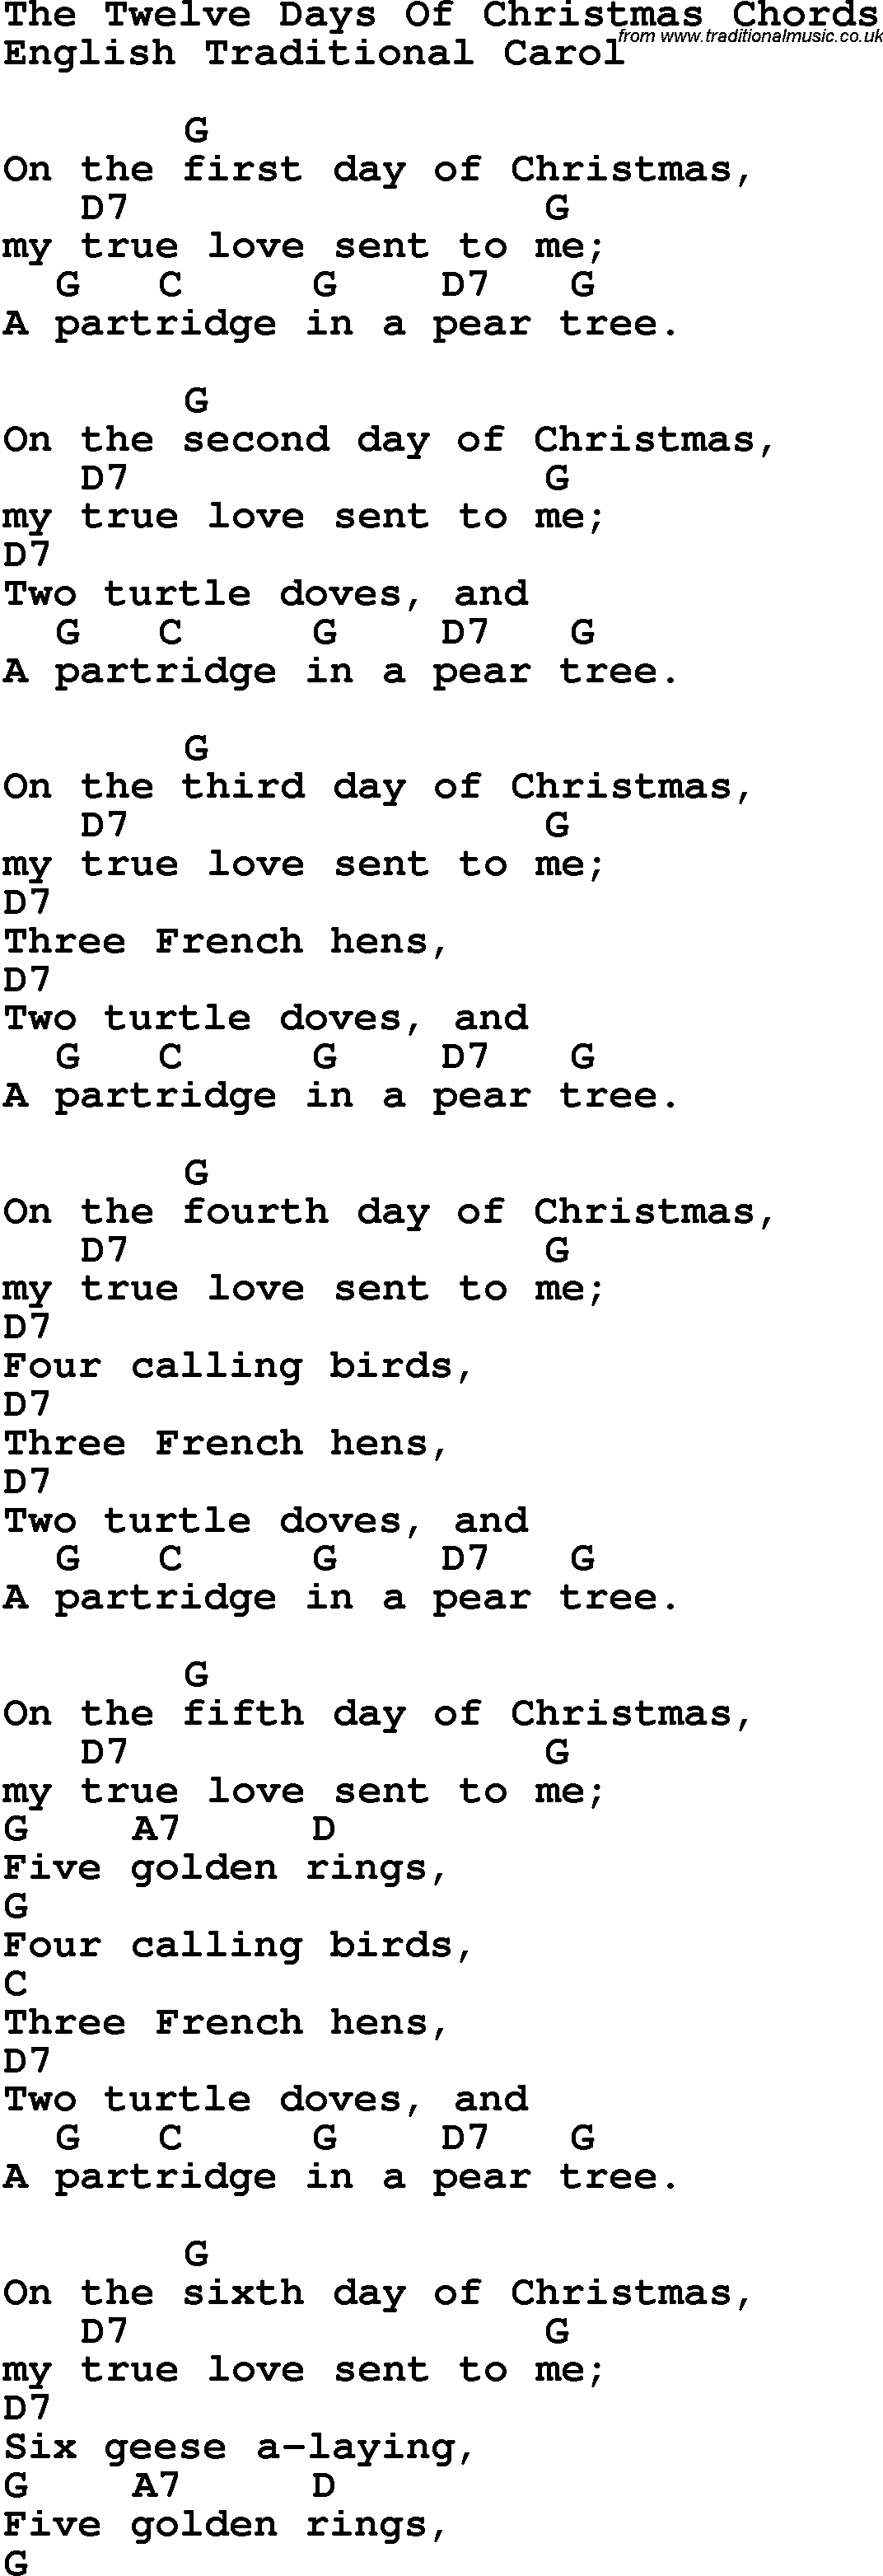 Song Lyrics with guitar chords for The Twelve Days Of Christmas